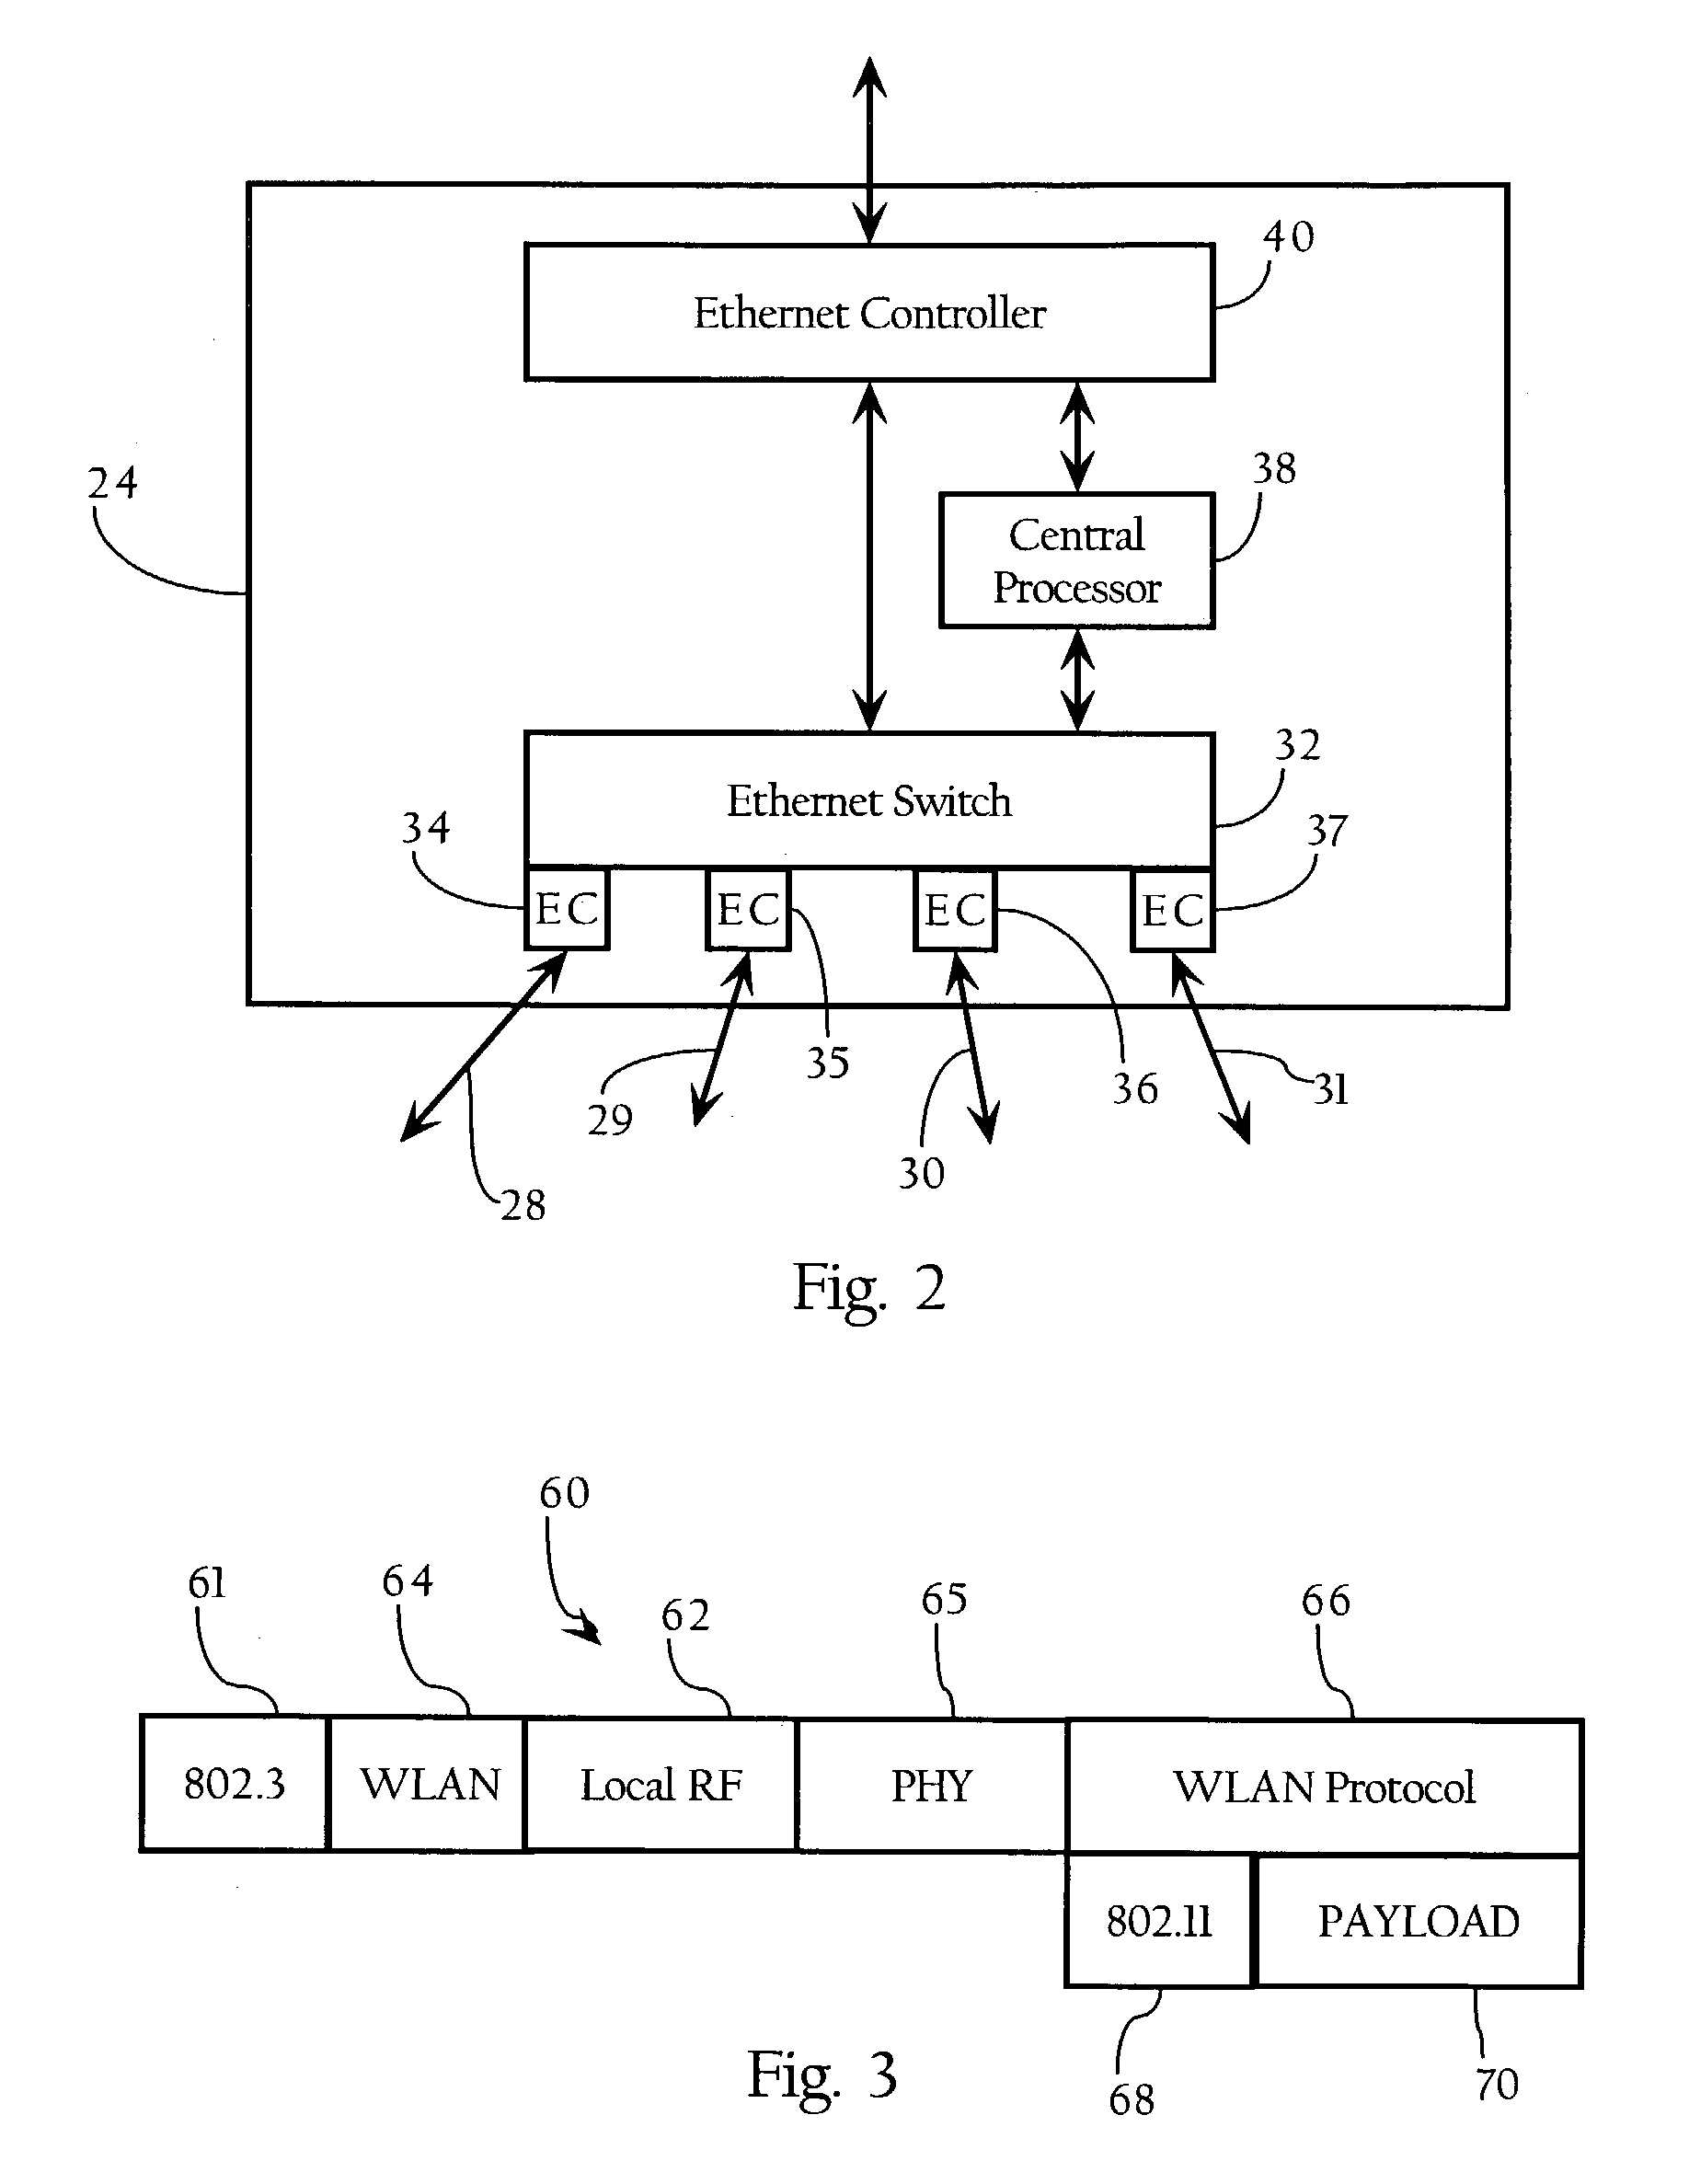 Method and system for hierarchical processing of protocol information in a wireless LAN